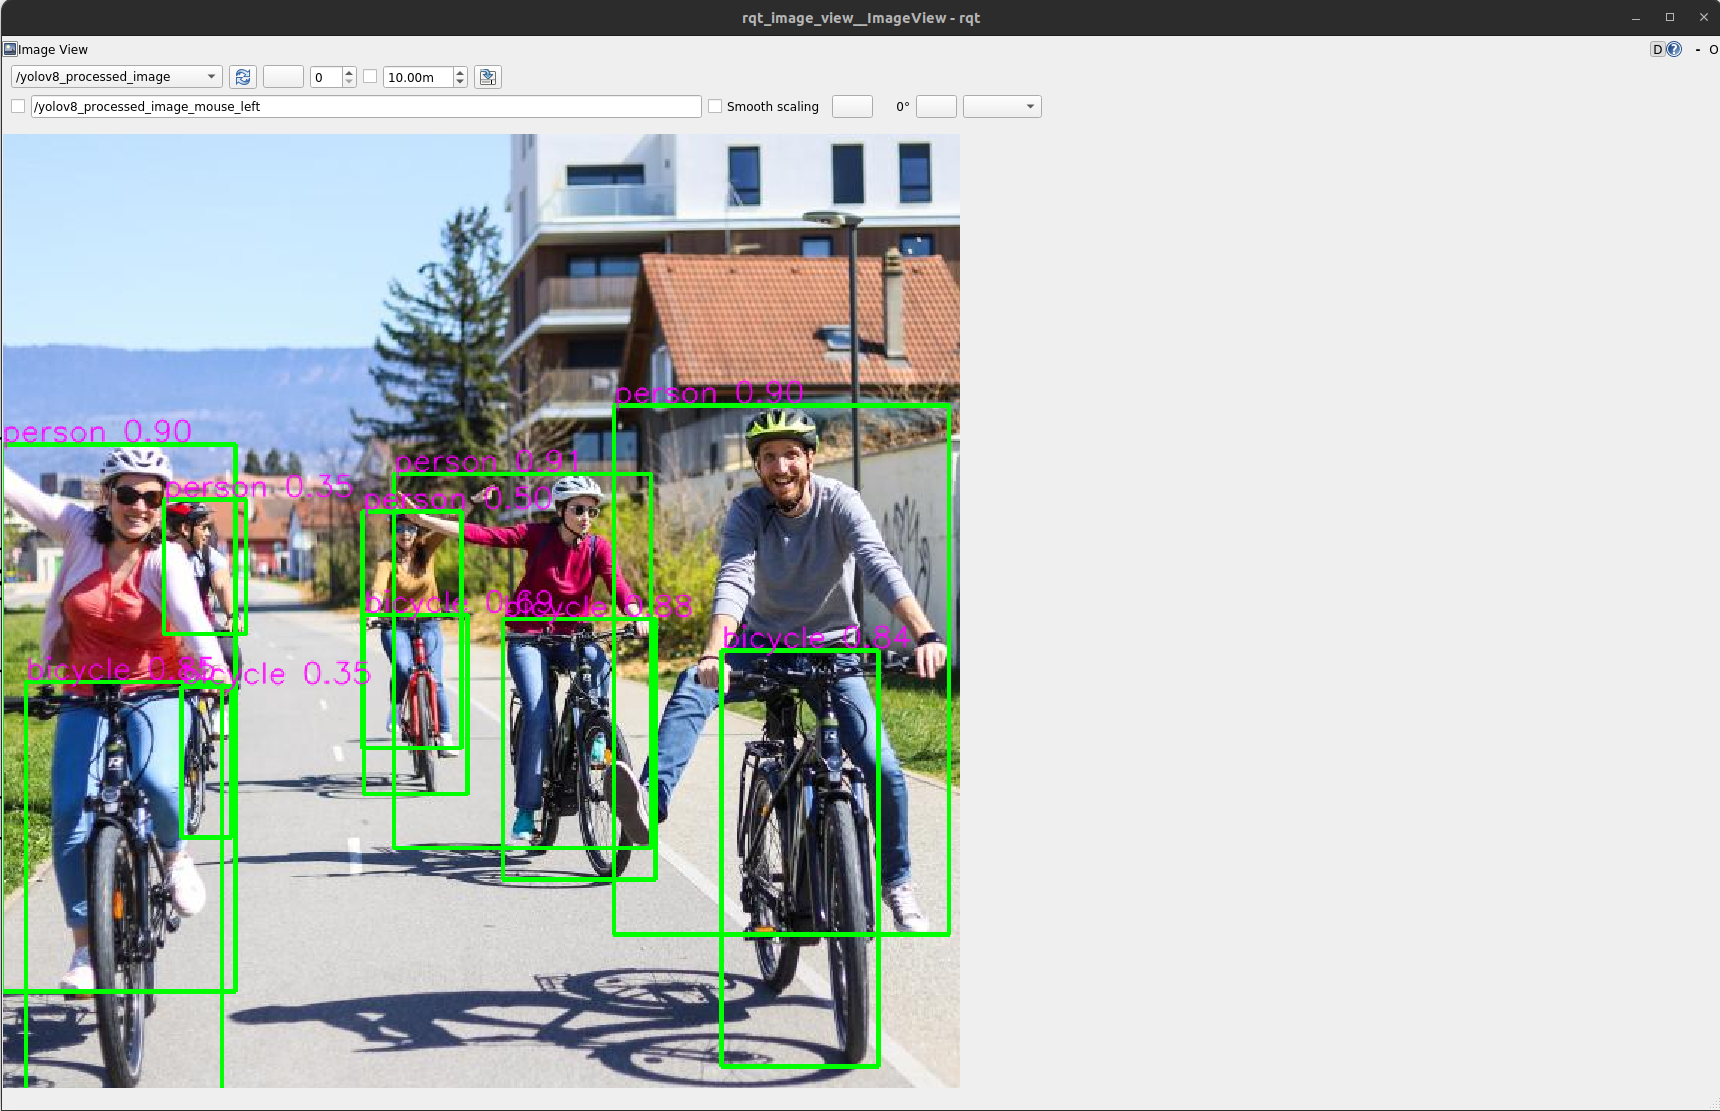 RQT showing detection of people cycling and bikes